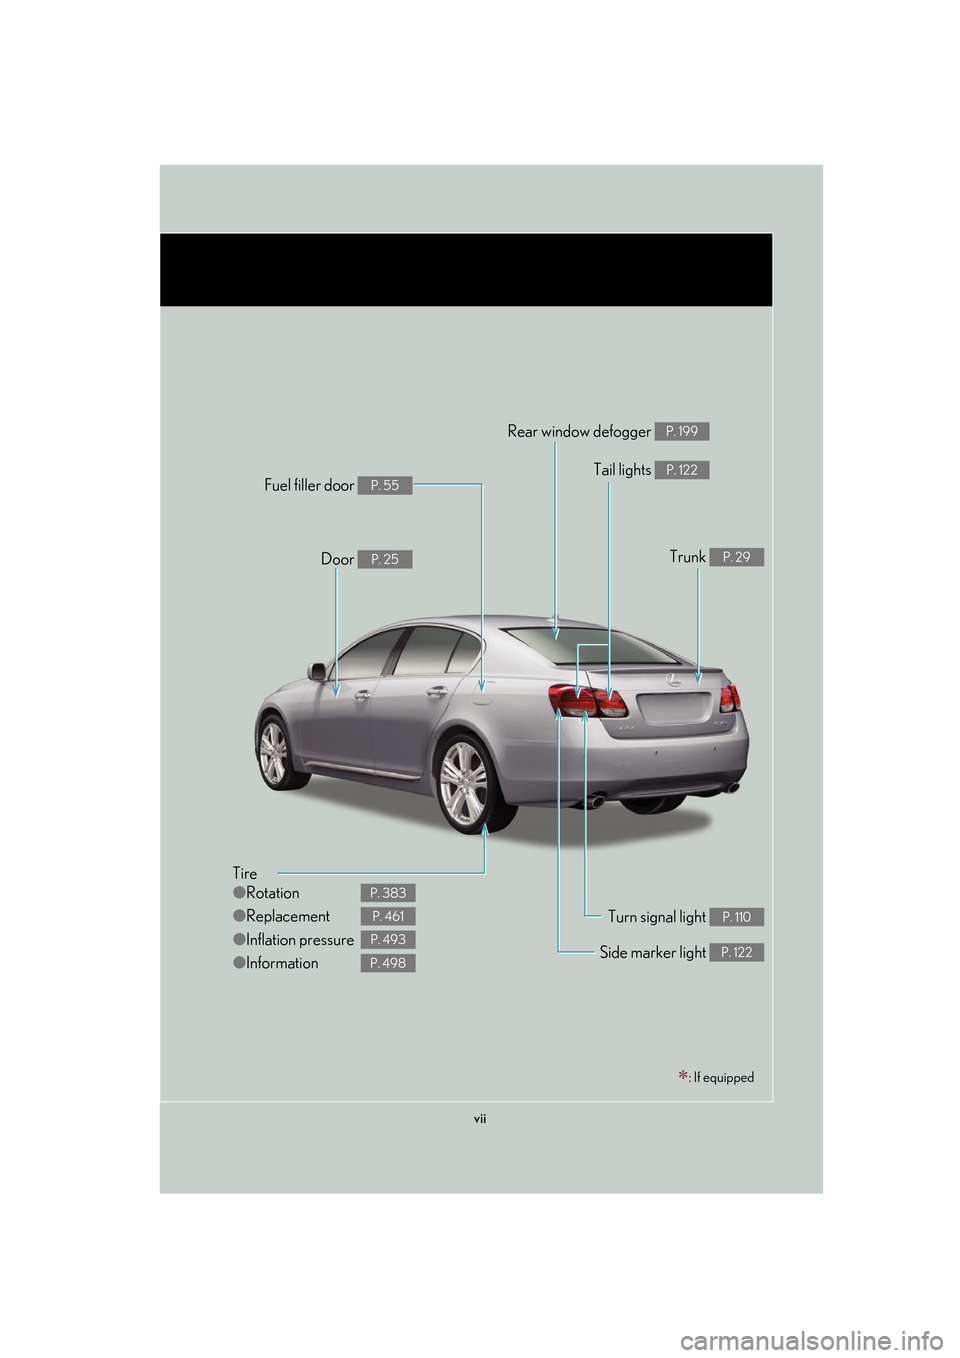 Lexus GS450h 2007  Using the audio system / LEXUS 2007 GS450H FROM JULY 2006 PROD. OWNERS MANUAL (OM30A05U) vii
Tire
●Rotation
● Replacement
● Inflation pressure
● Information
P. 383
P. 461
P. 493
P. 498
Tail lights P. 122
Side marker light P. 122
Trunk P. 29
Rear window defogger P. 199
Door P. 25
F